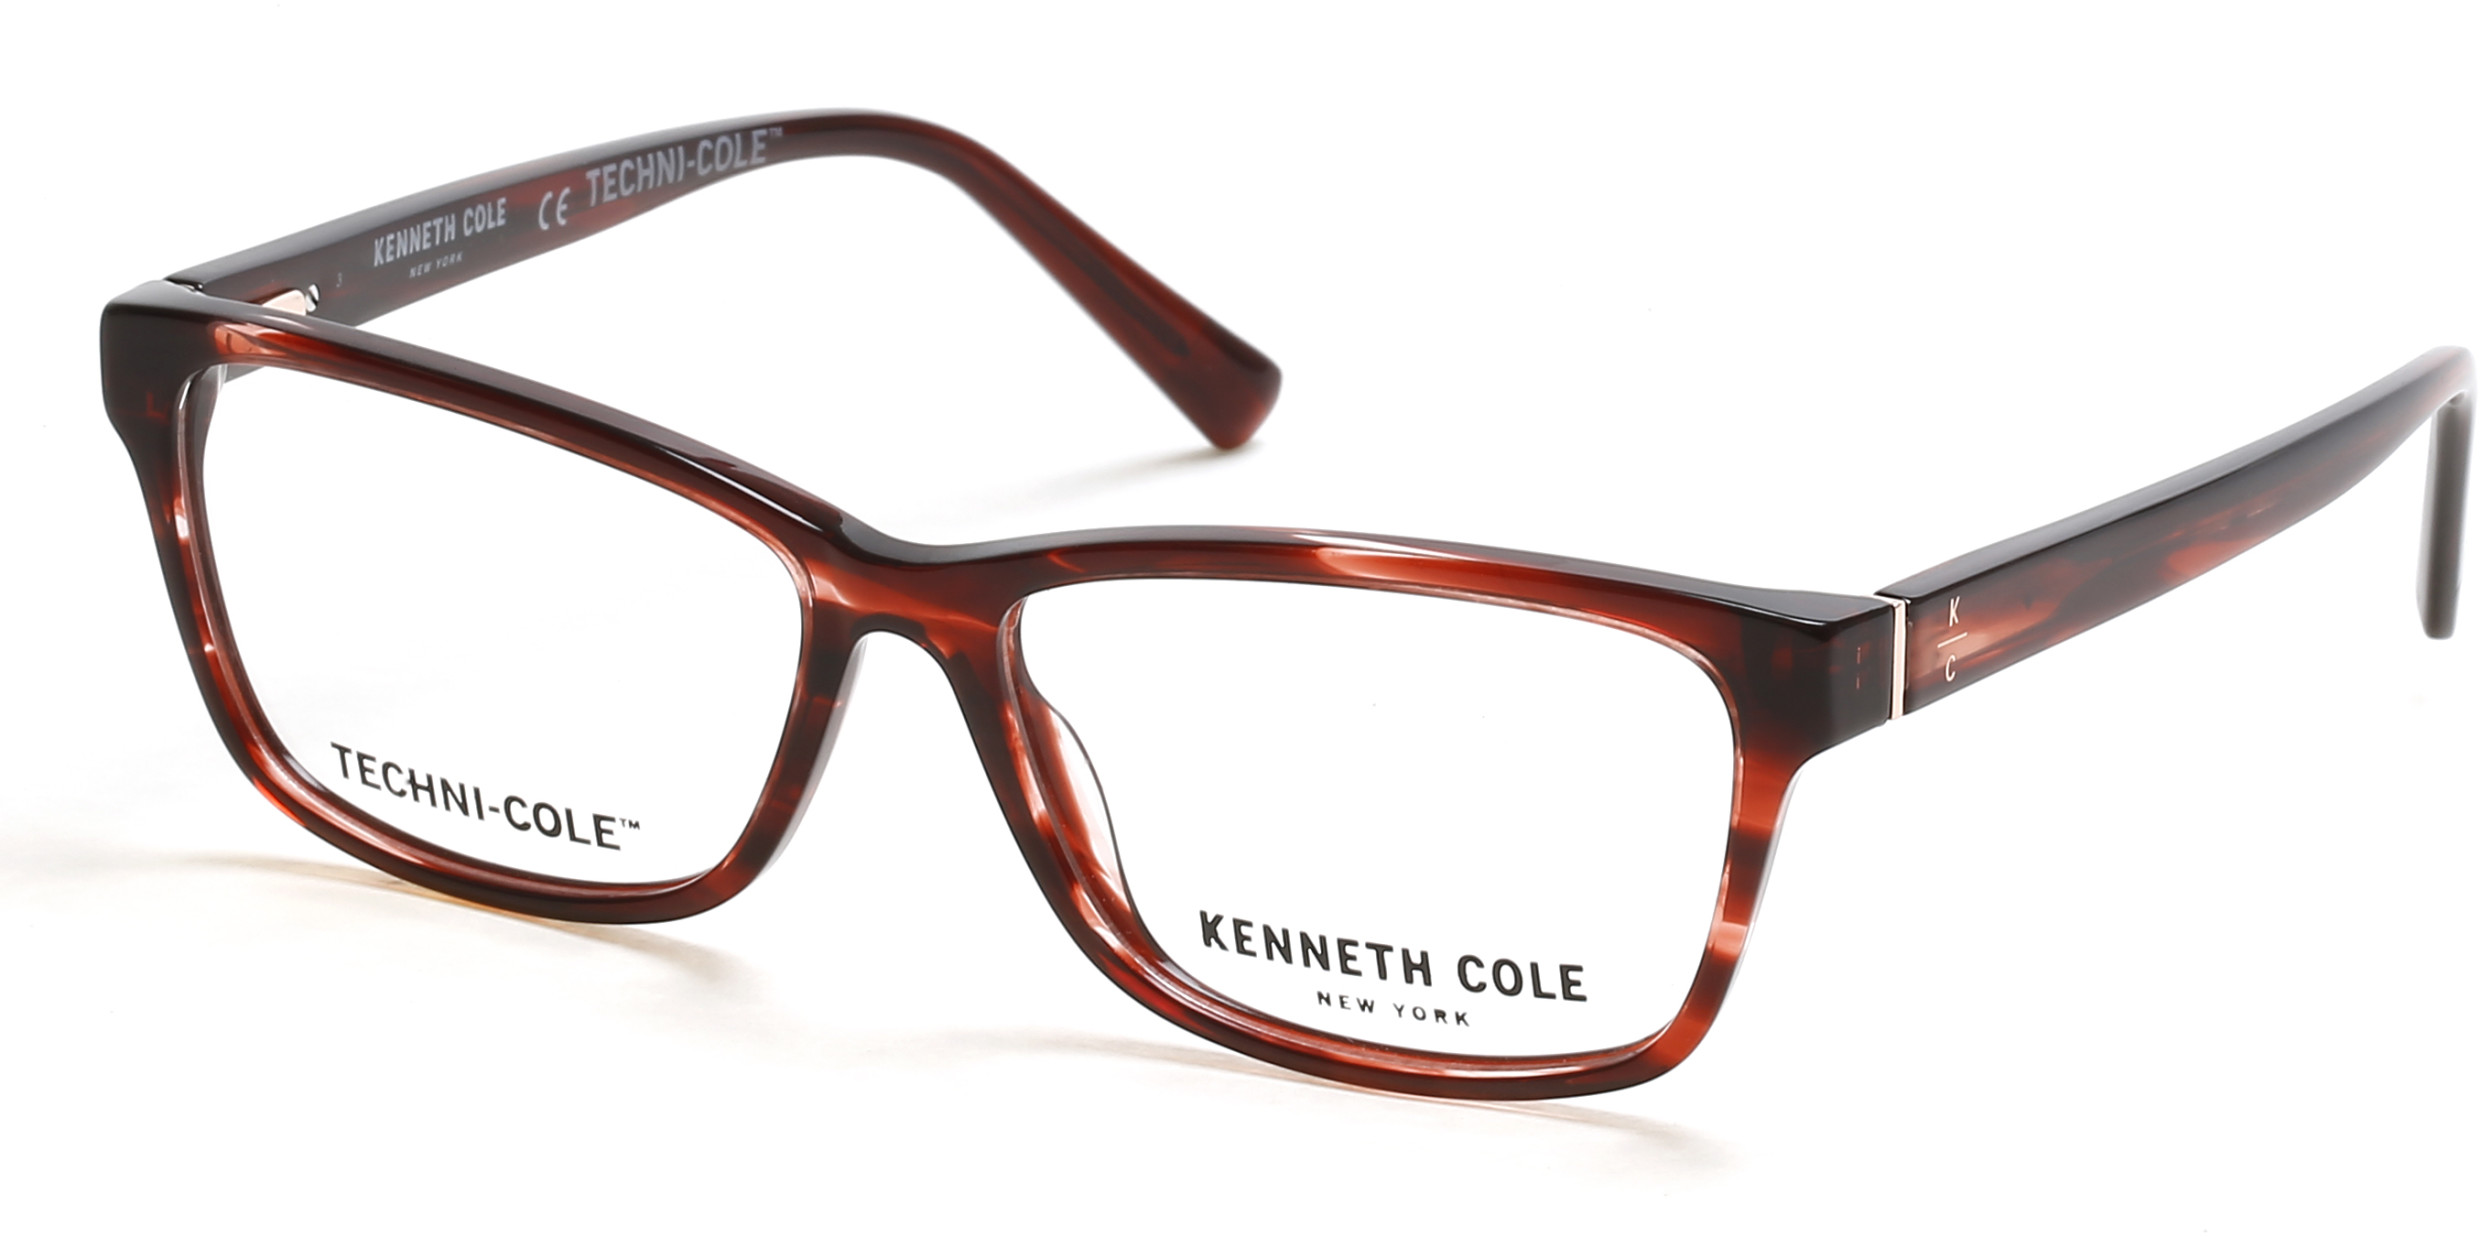 KENNETH COLE NY 0333 066